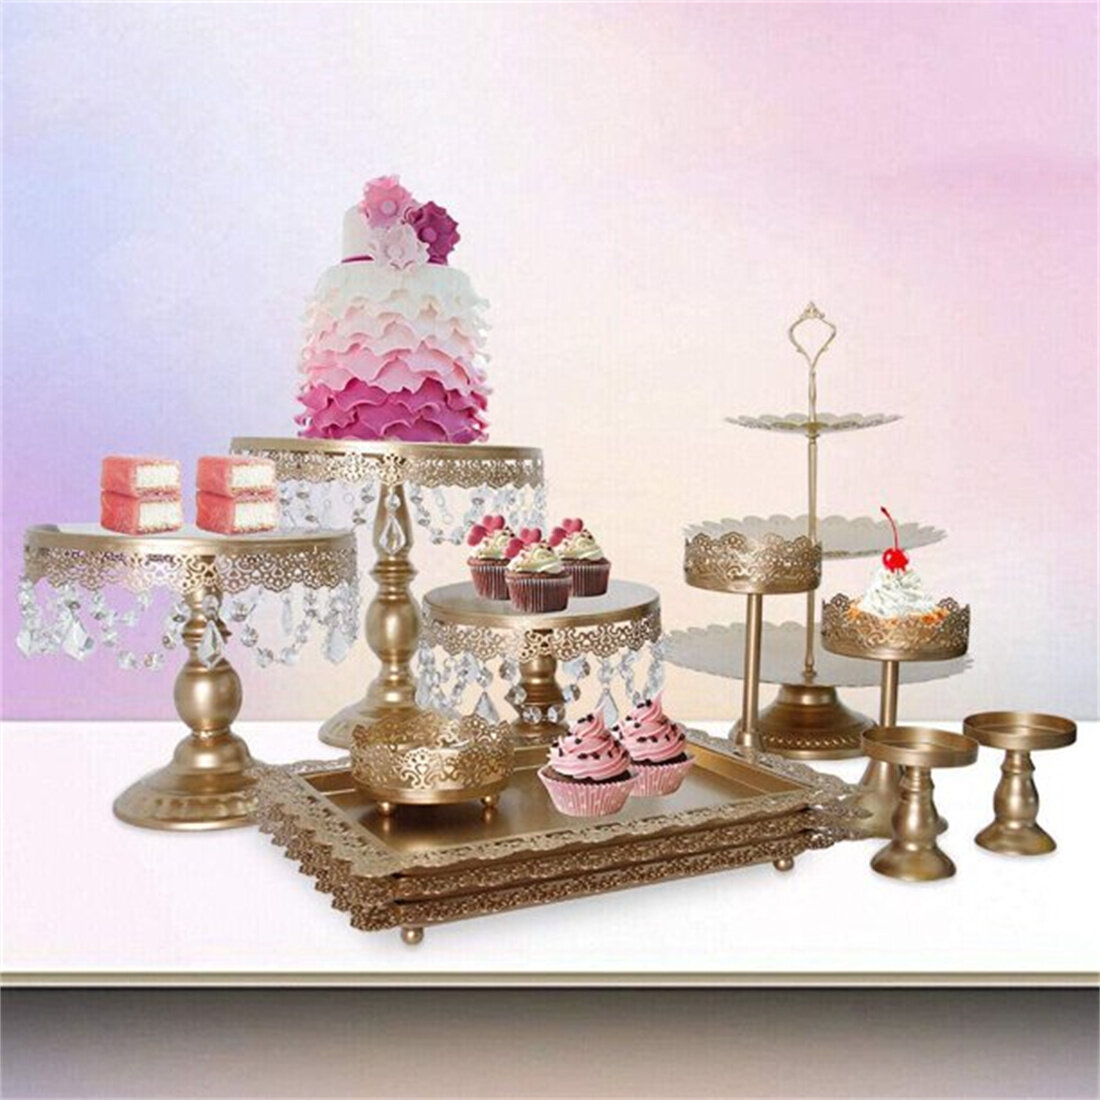 14pcs Classical Gold Cake Stand Wedding Party 3-Tier Metal Dessert Holder Set US 